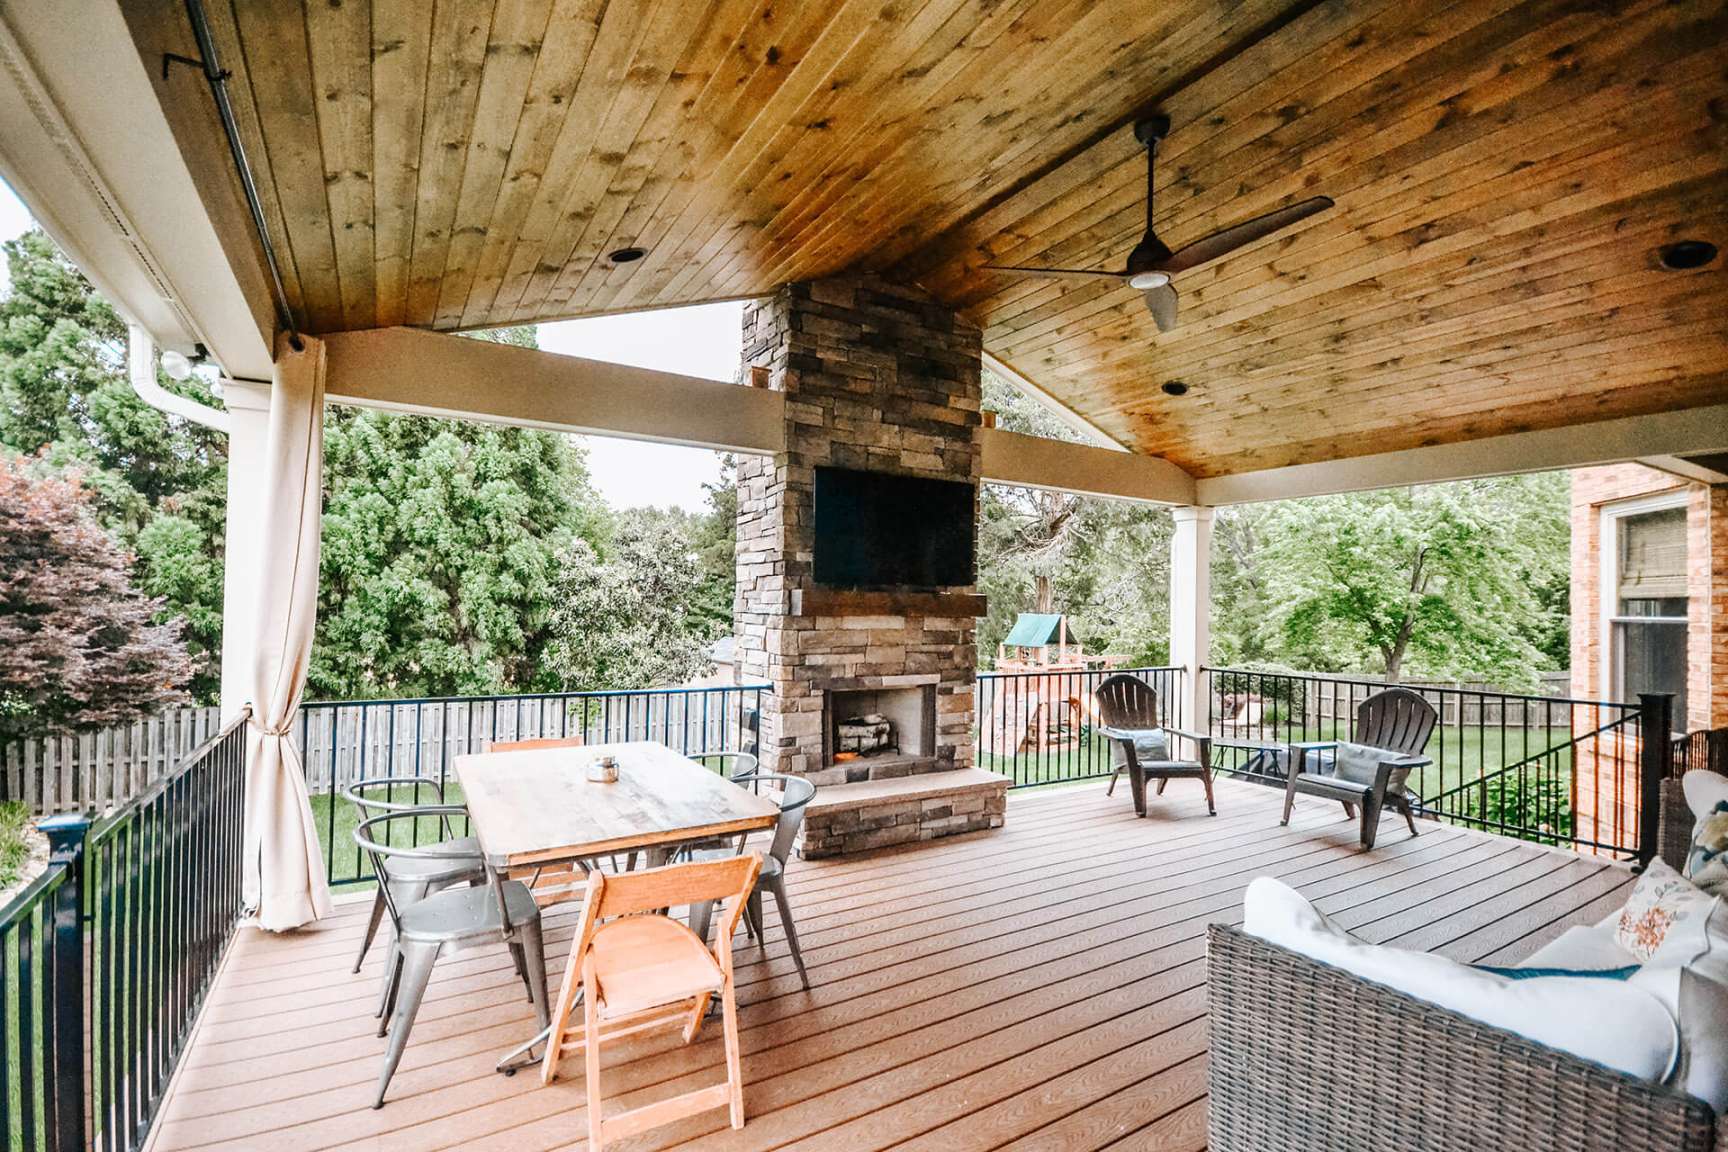 Cozy Outdoor Living: Covered Deck With Fireplace Extends Living